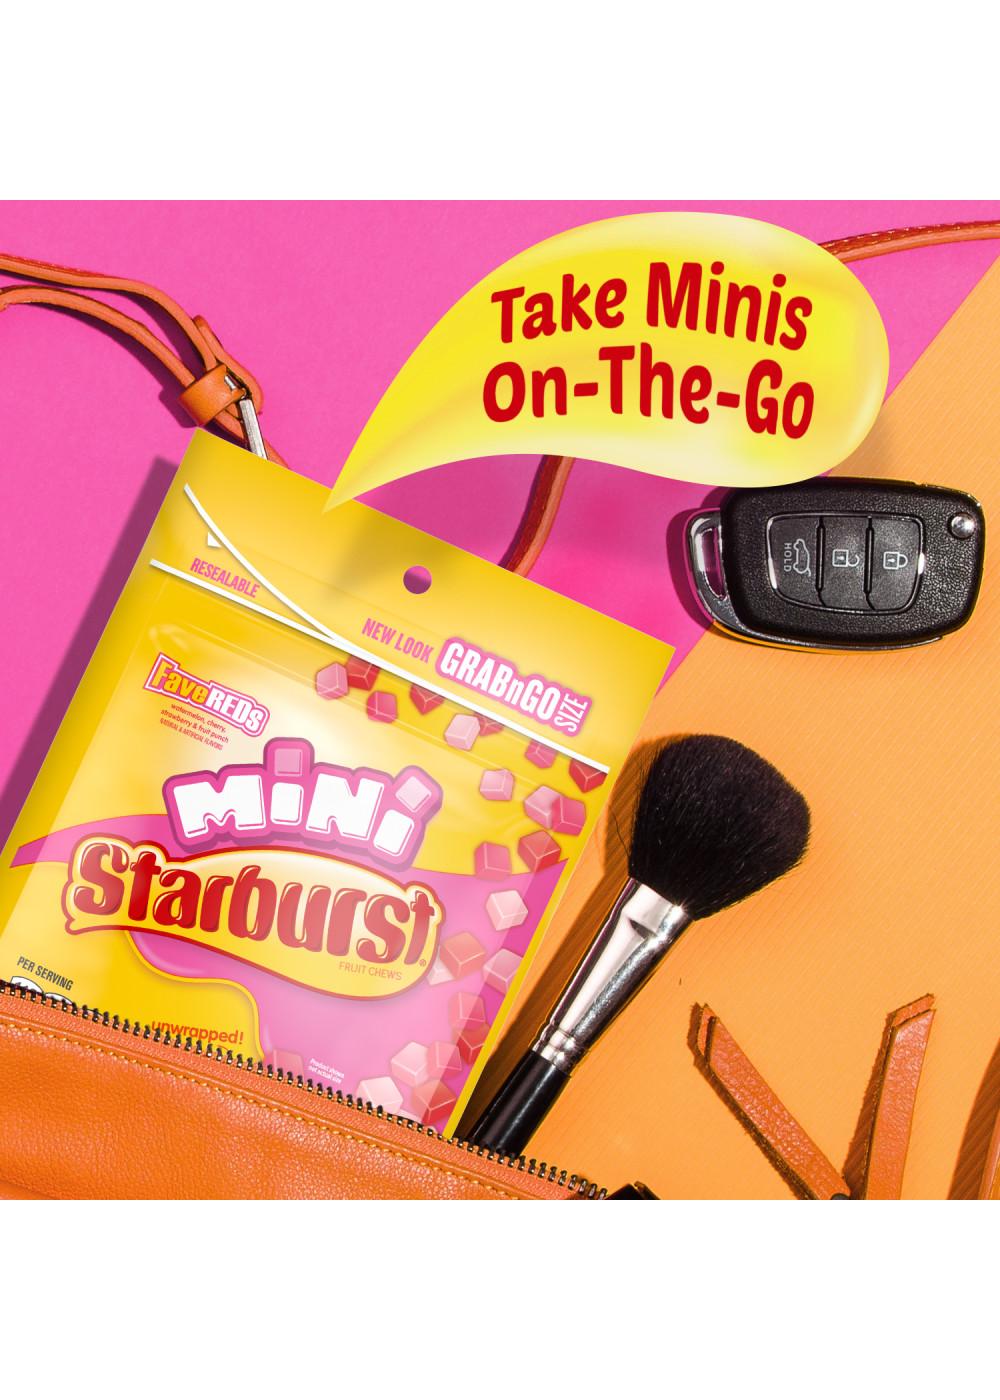 Starburst FaveReds Minis Chewy Candy - Grab & Go Size; image 5 of 5